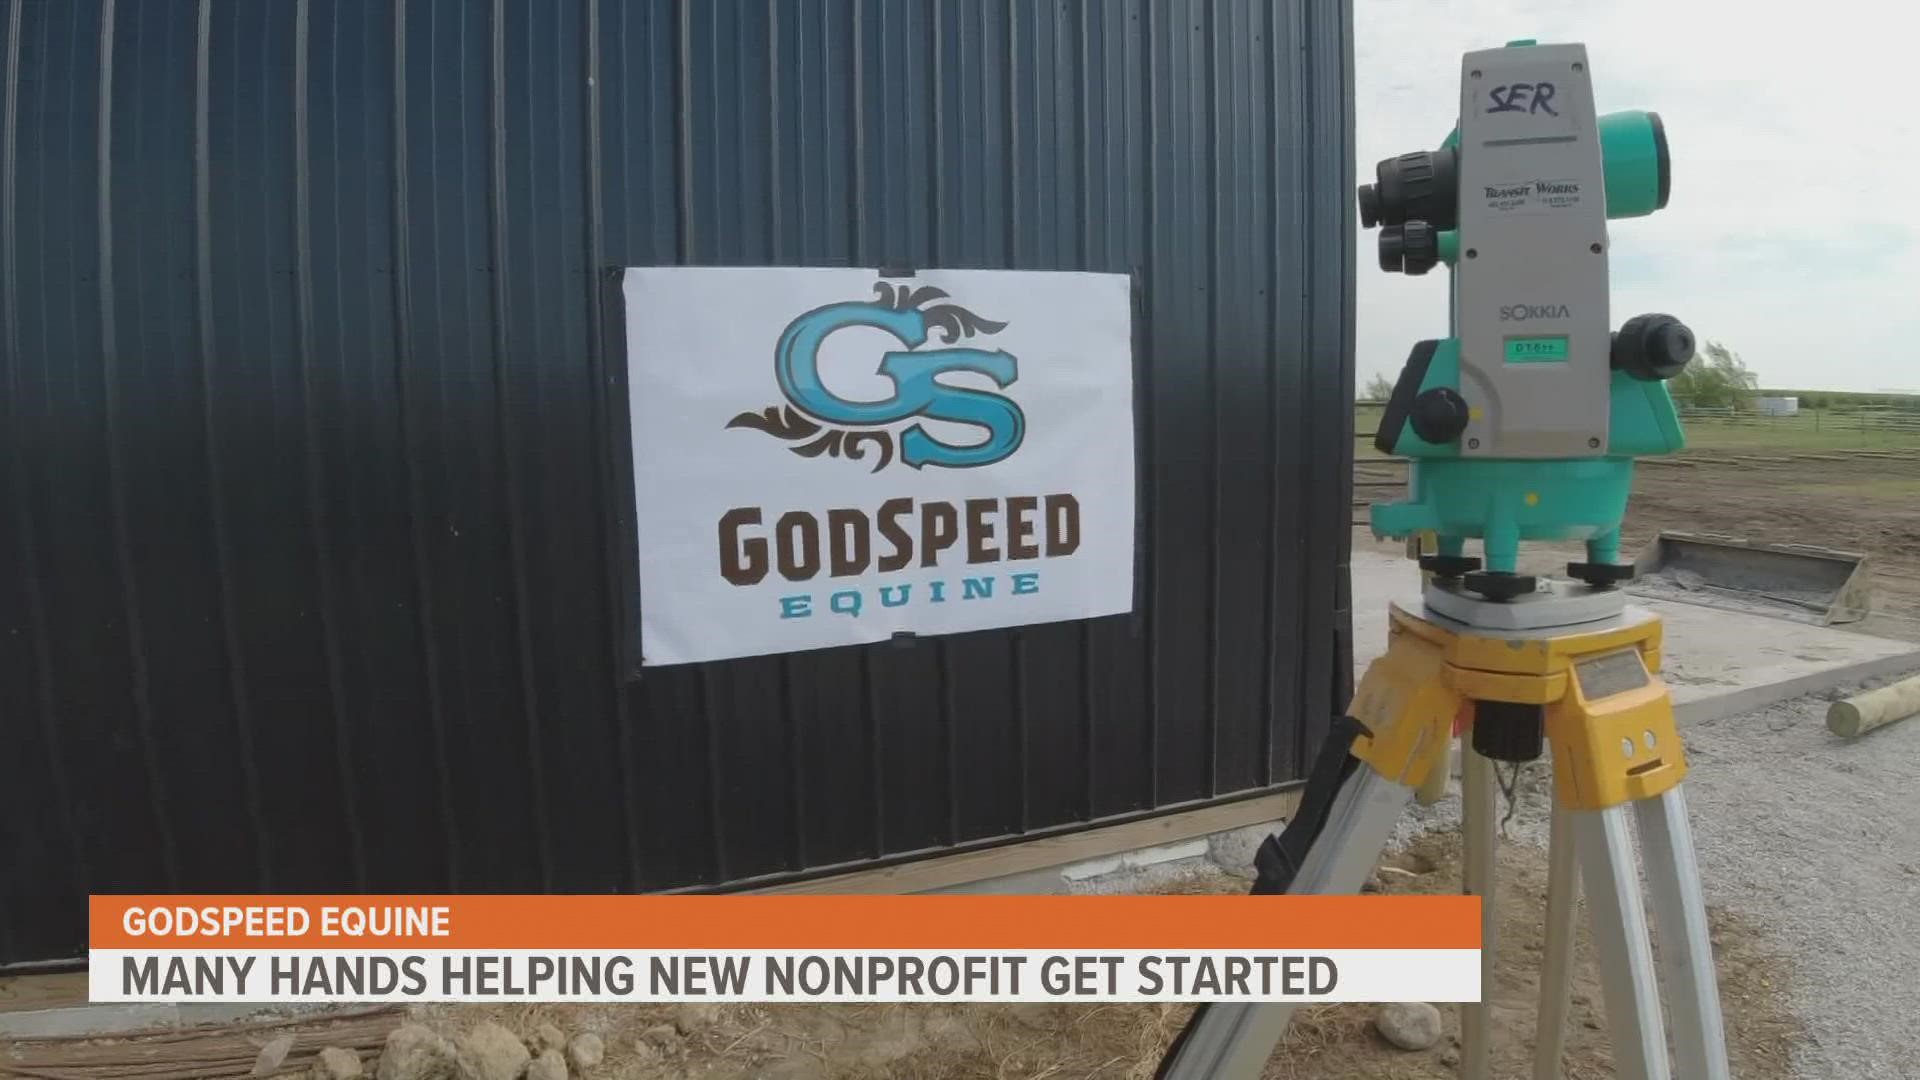 GodSpeed Equine is looking to open this October, offering assistance to at risk youth in the area